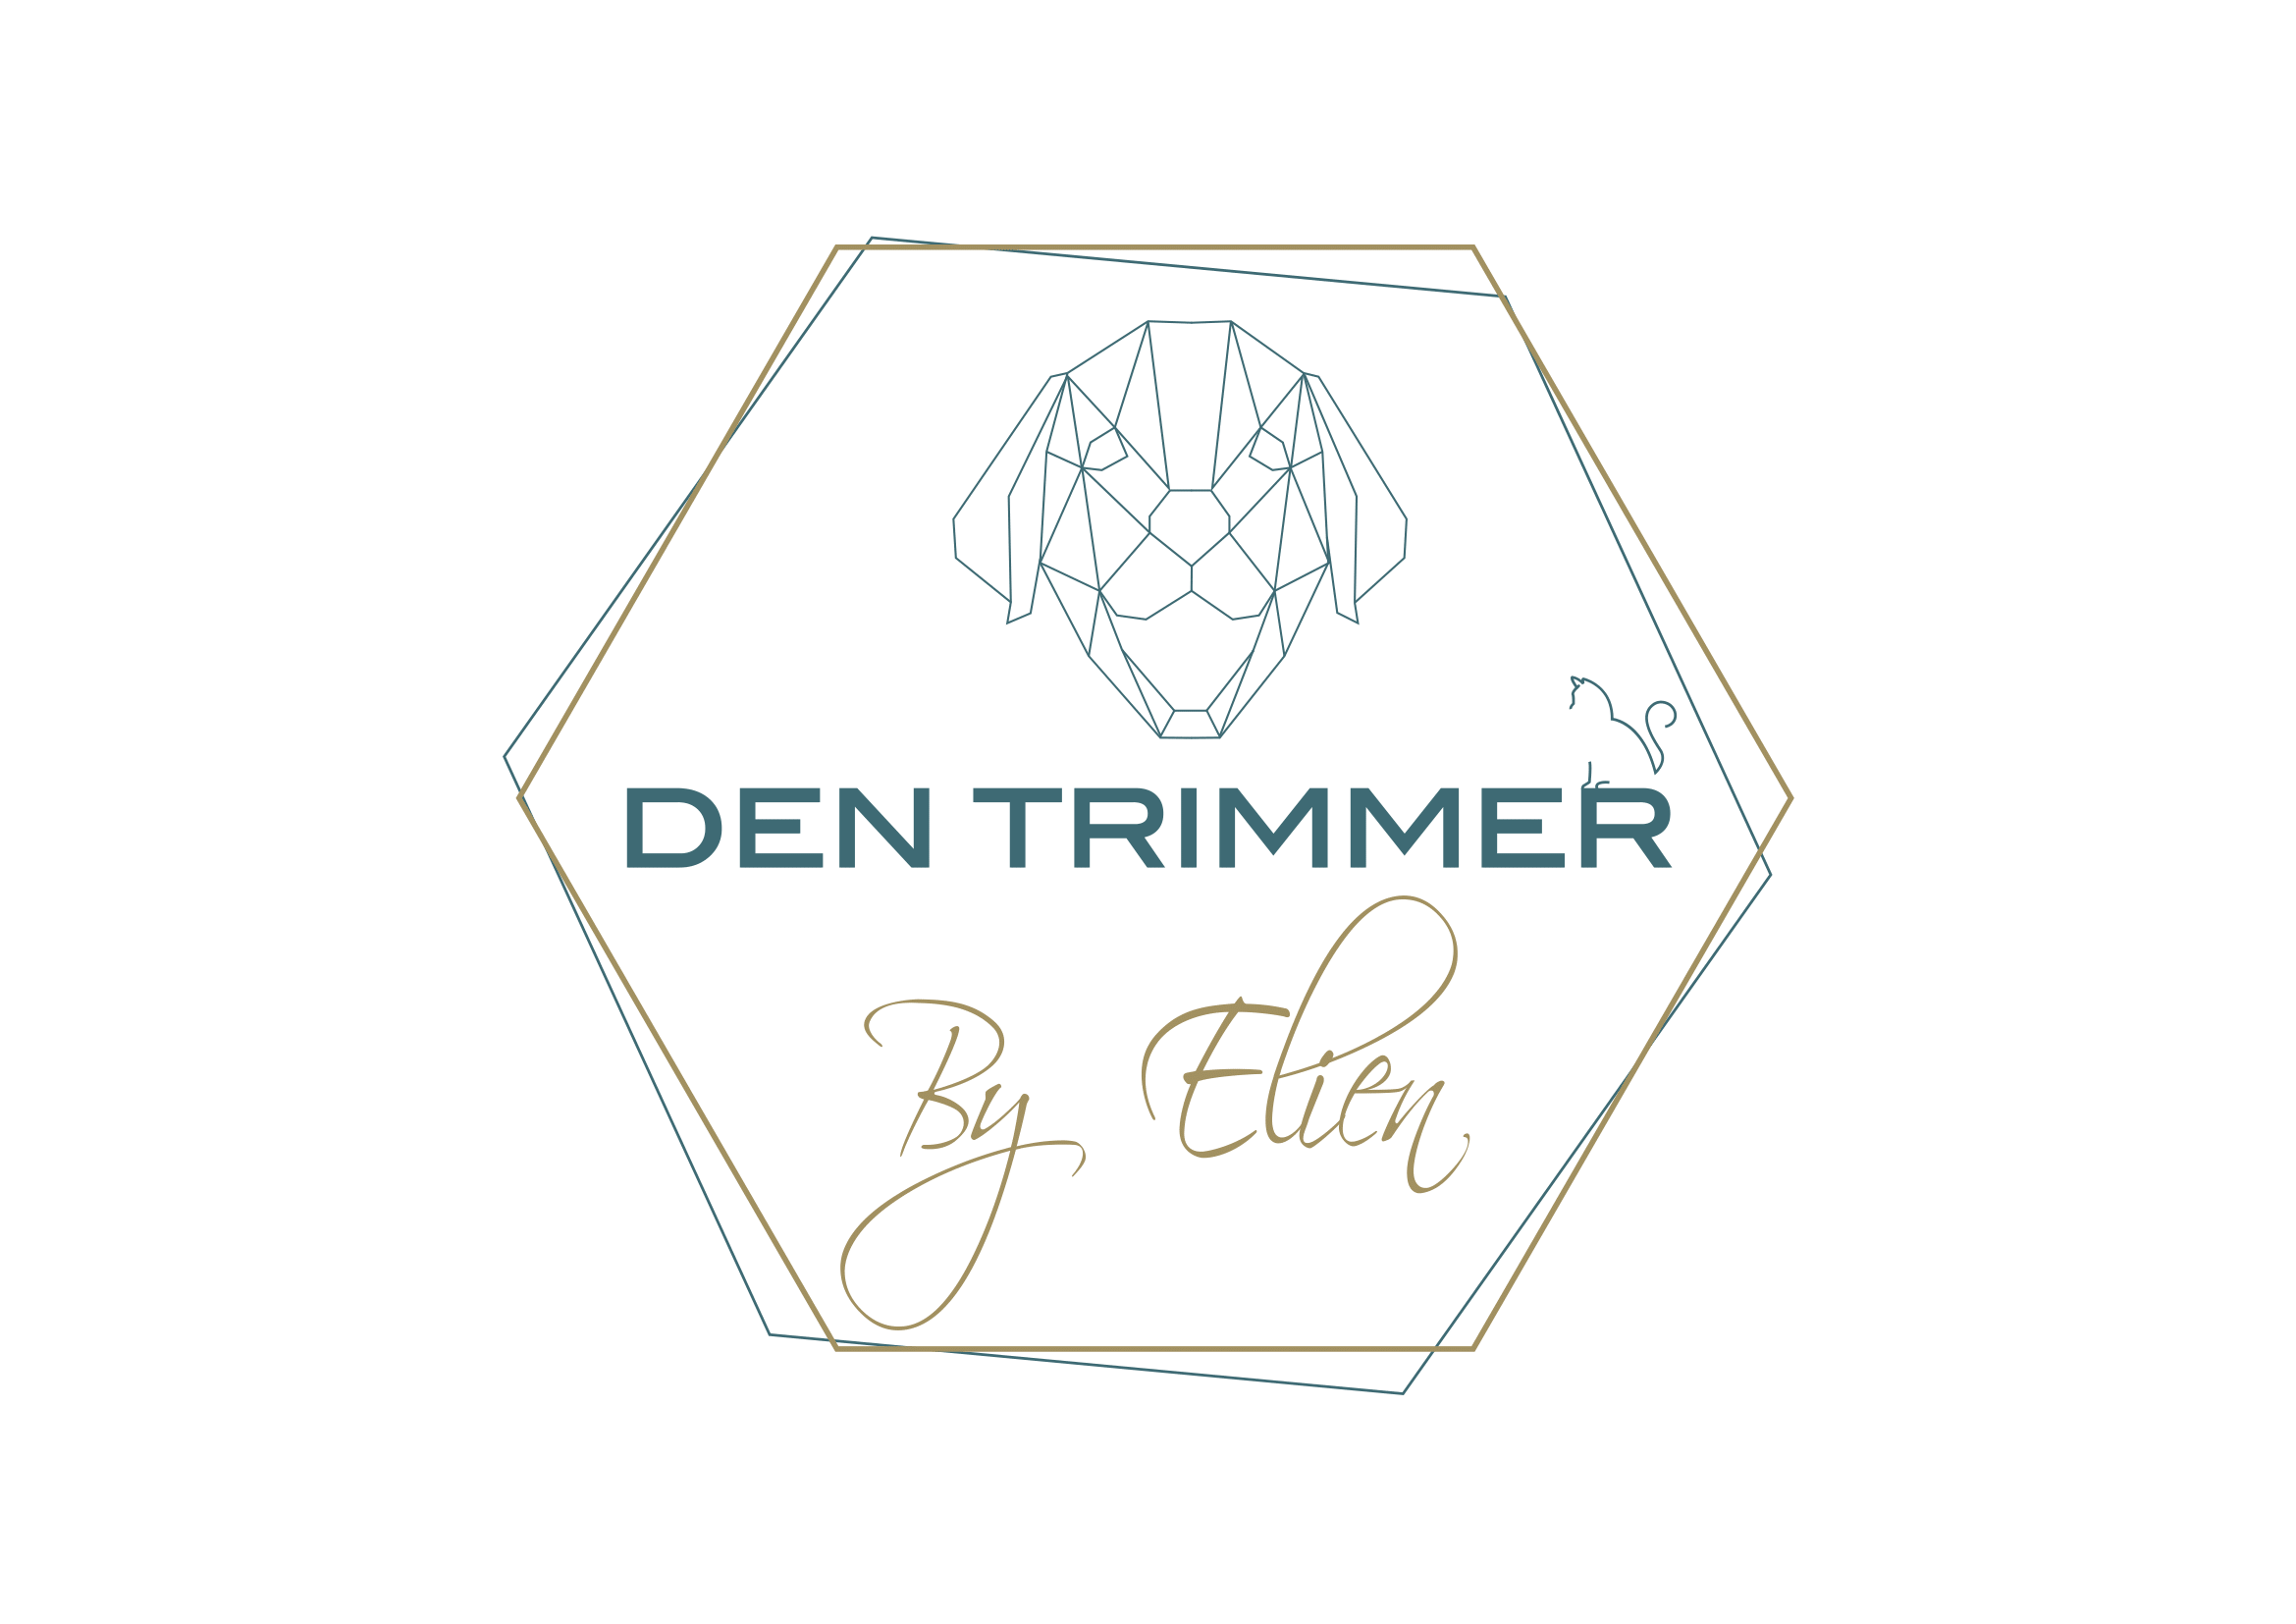 hondentrimmers Oud-Turnhout Den Trimmer By Elien